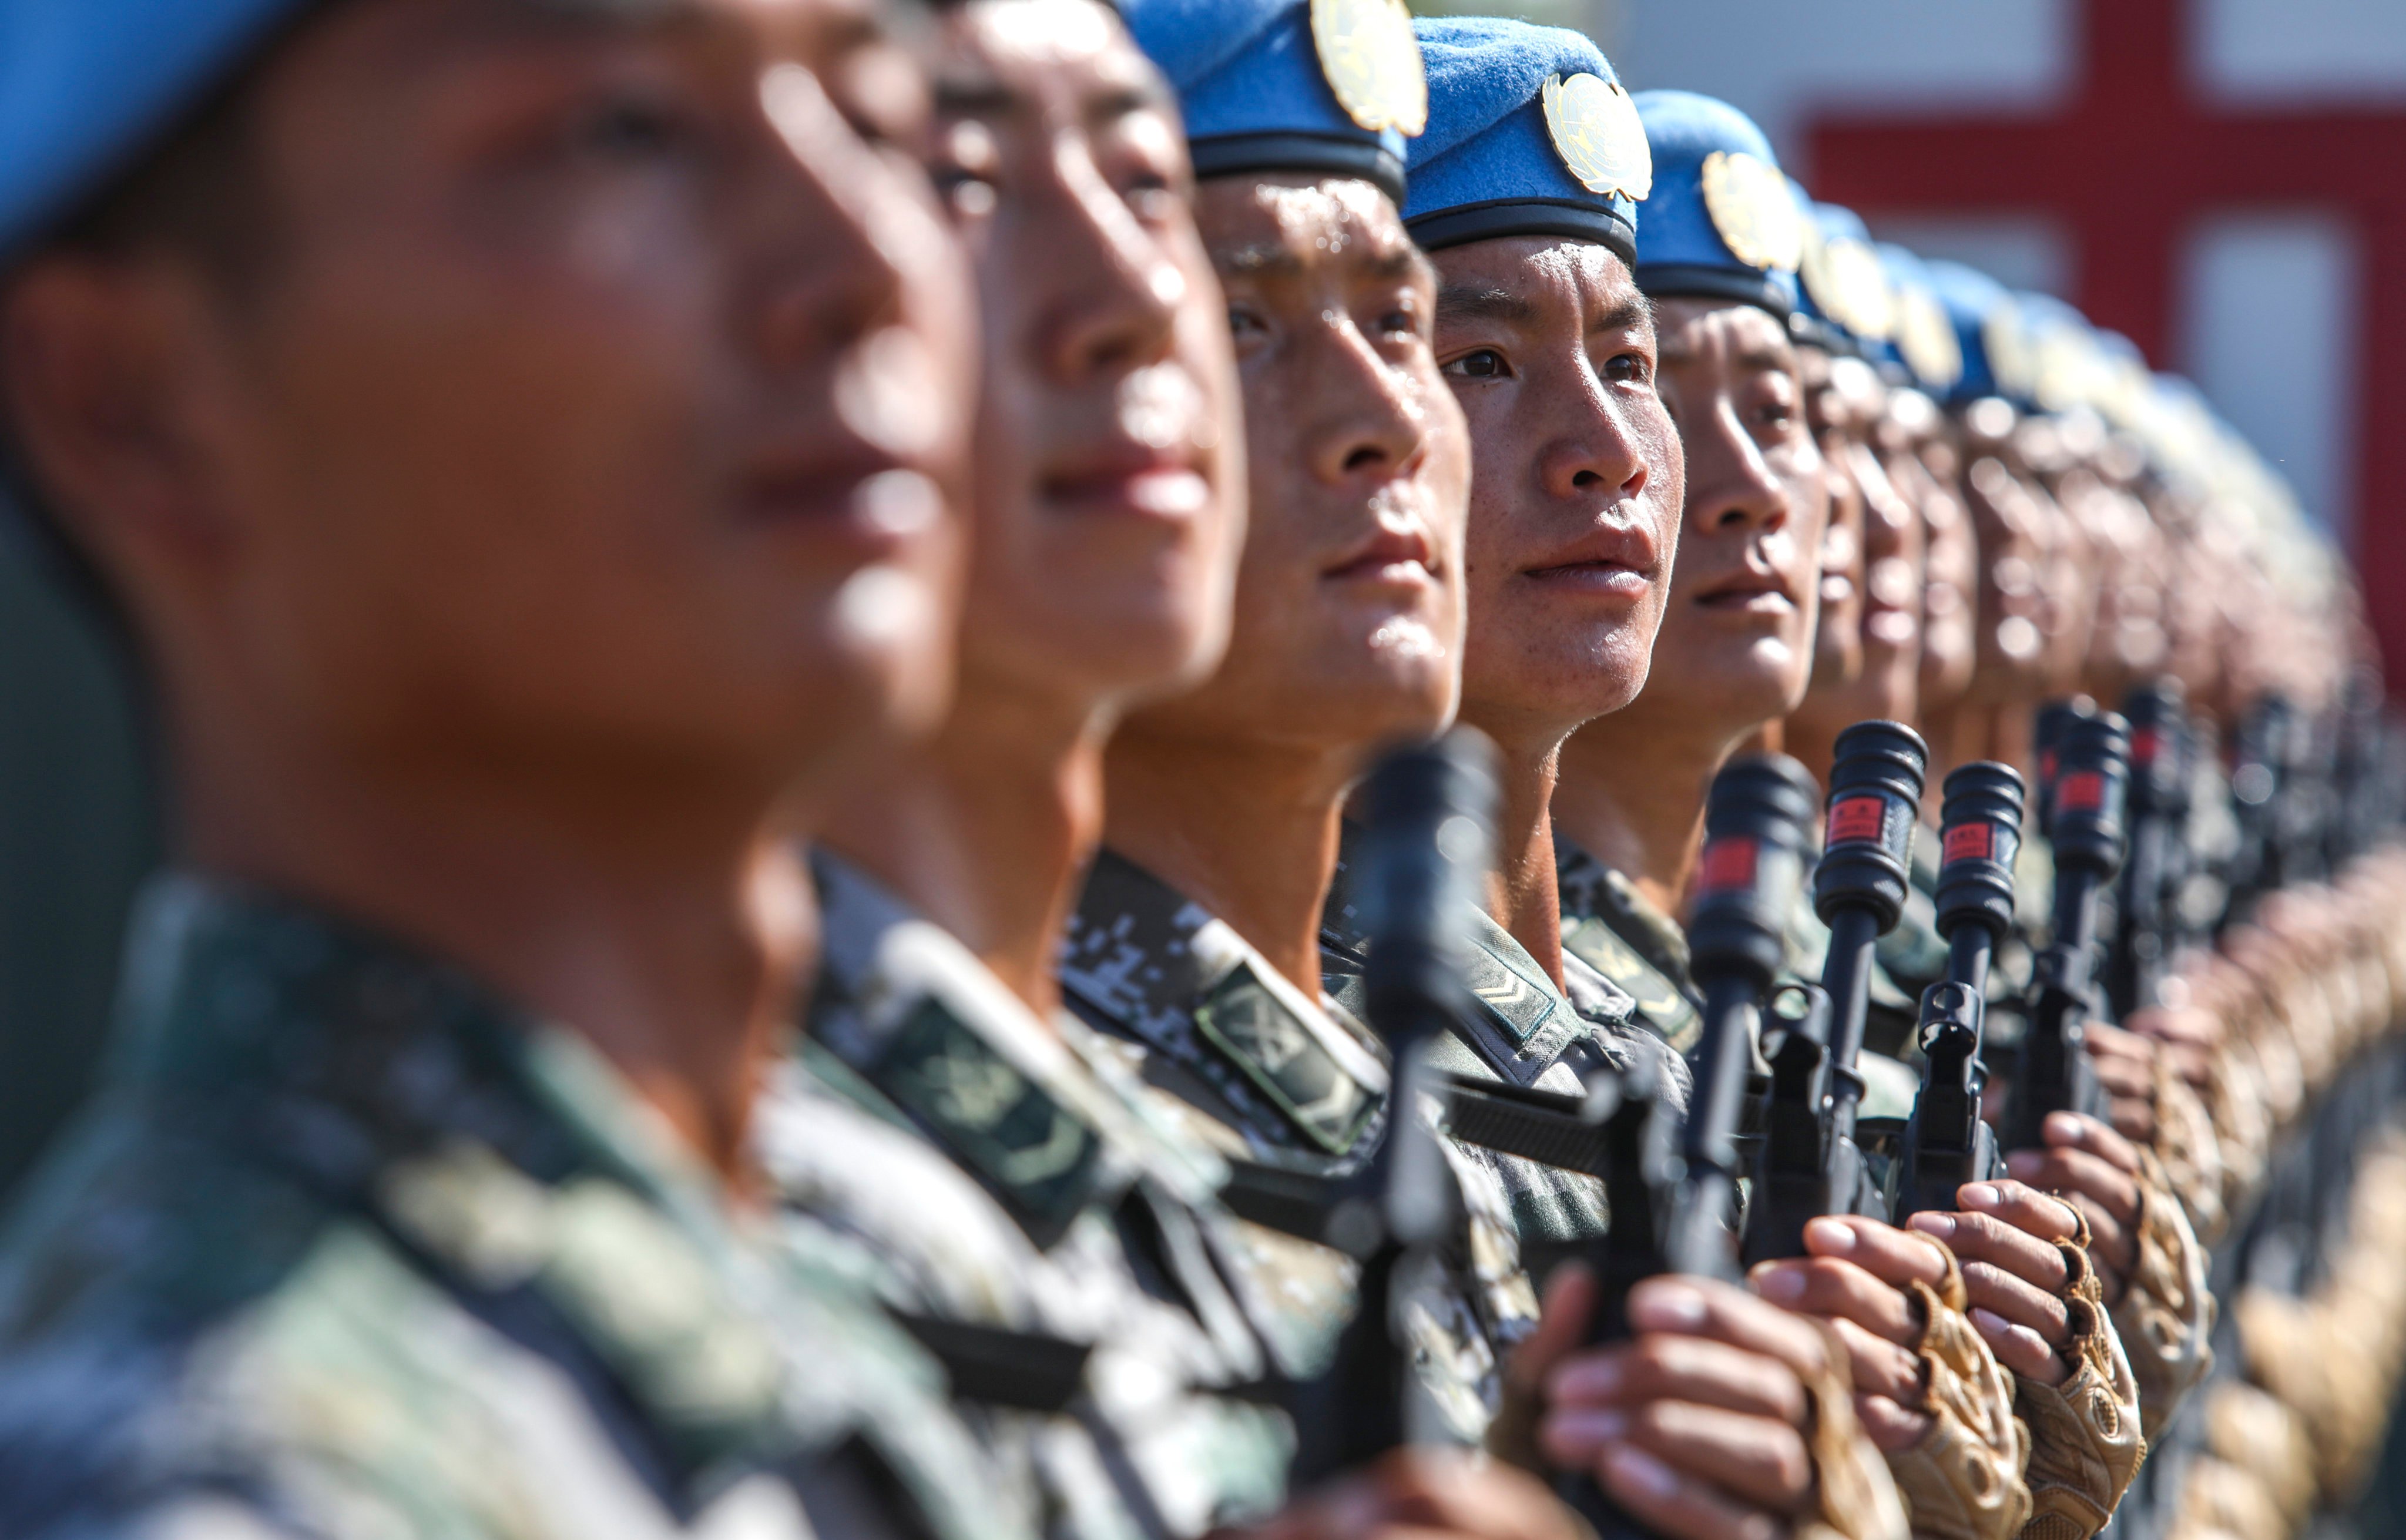 China’s UN peacekeeping troops were withdrawn from Mali in December last year. Now, it is expected Beijing will focus its diplomacy with the West African nation on economic trade and infrastructure projects instead of any kind of conflict mediation. Photo: Simon Song